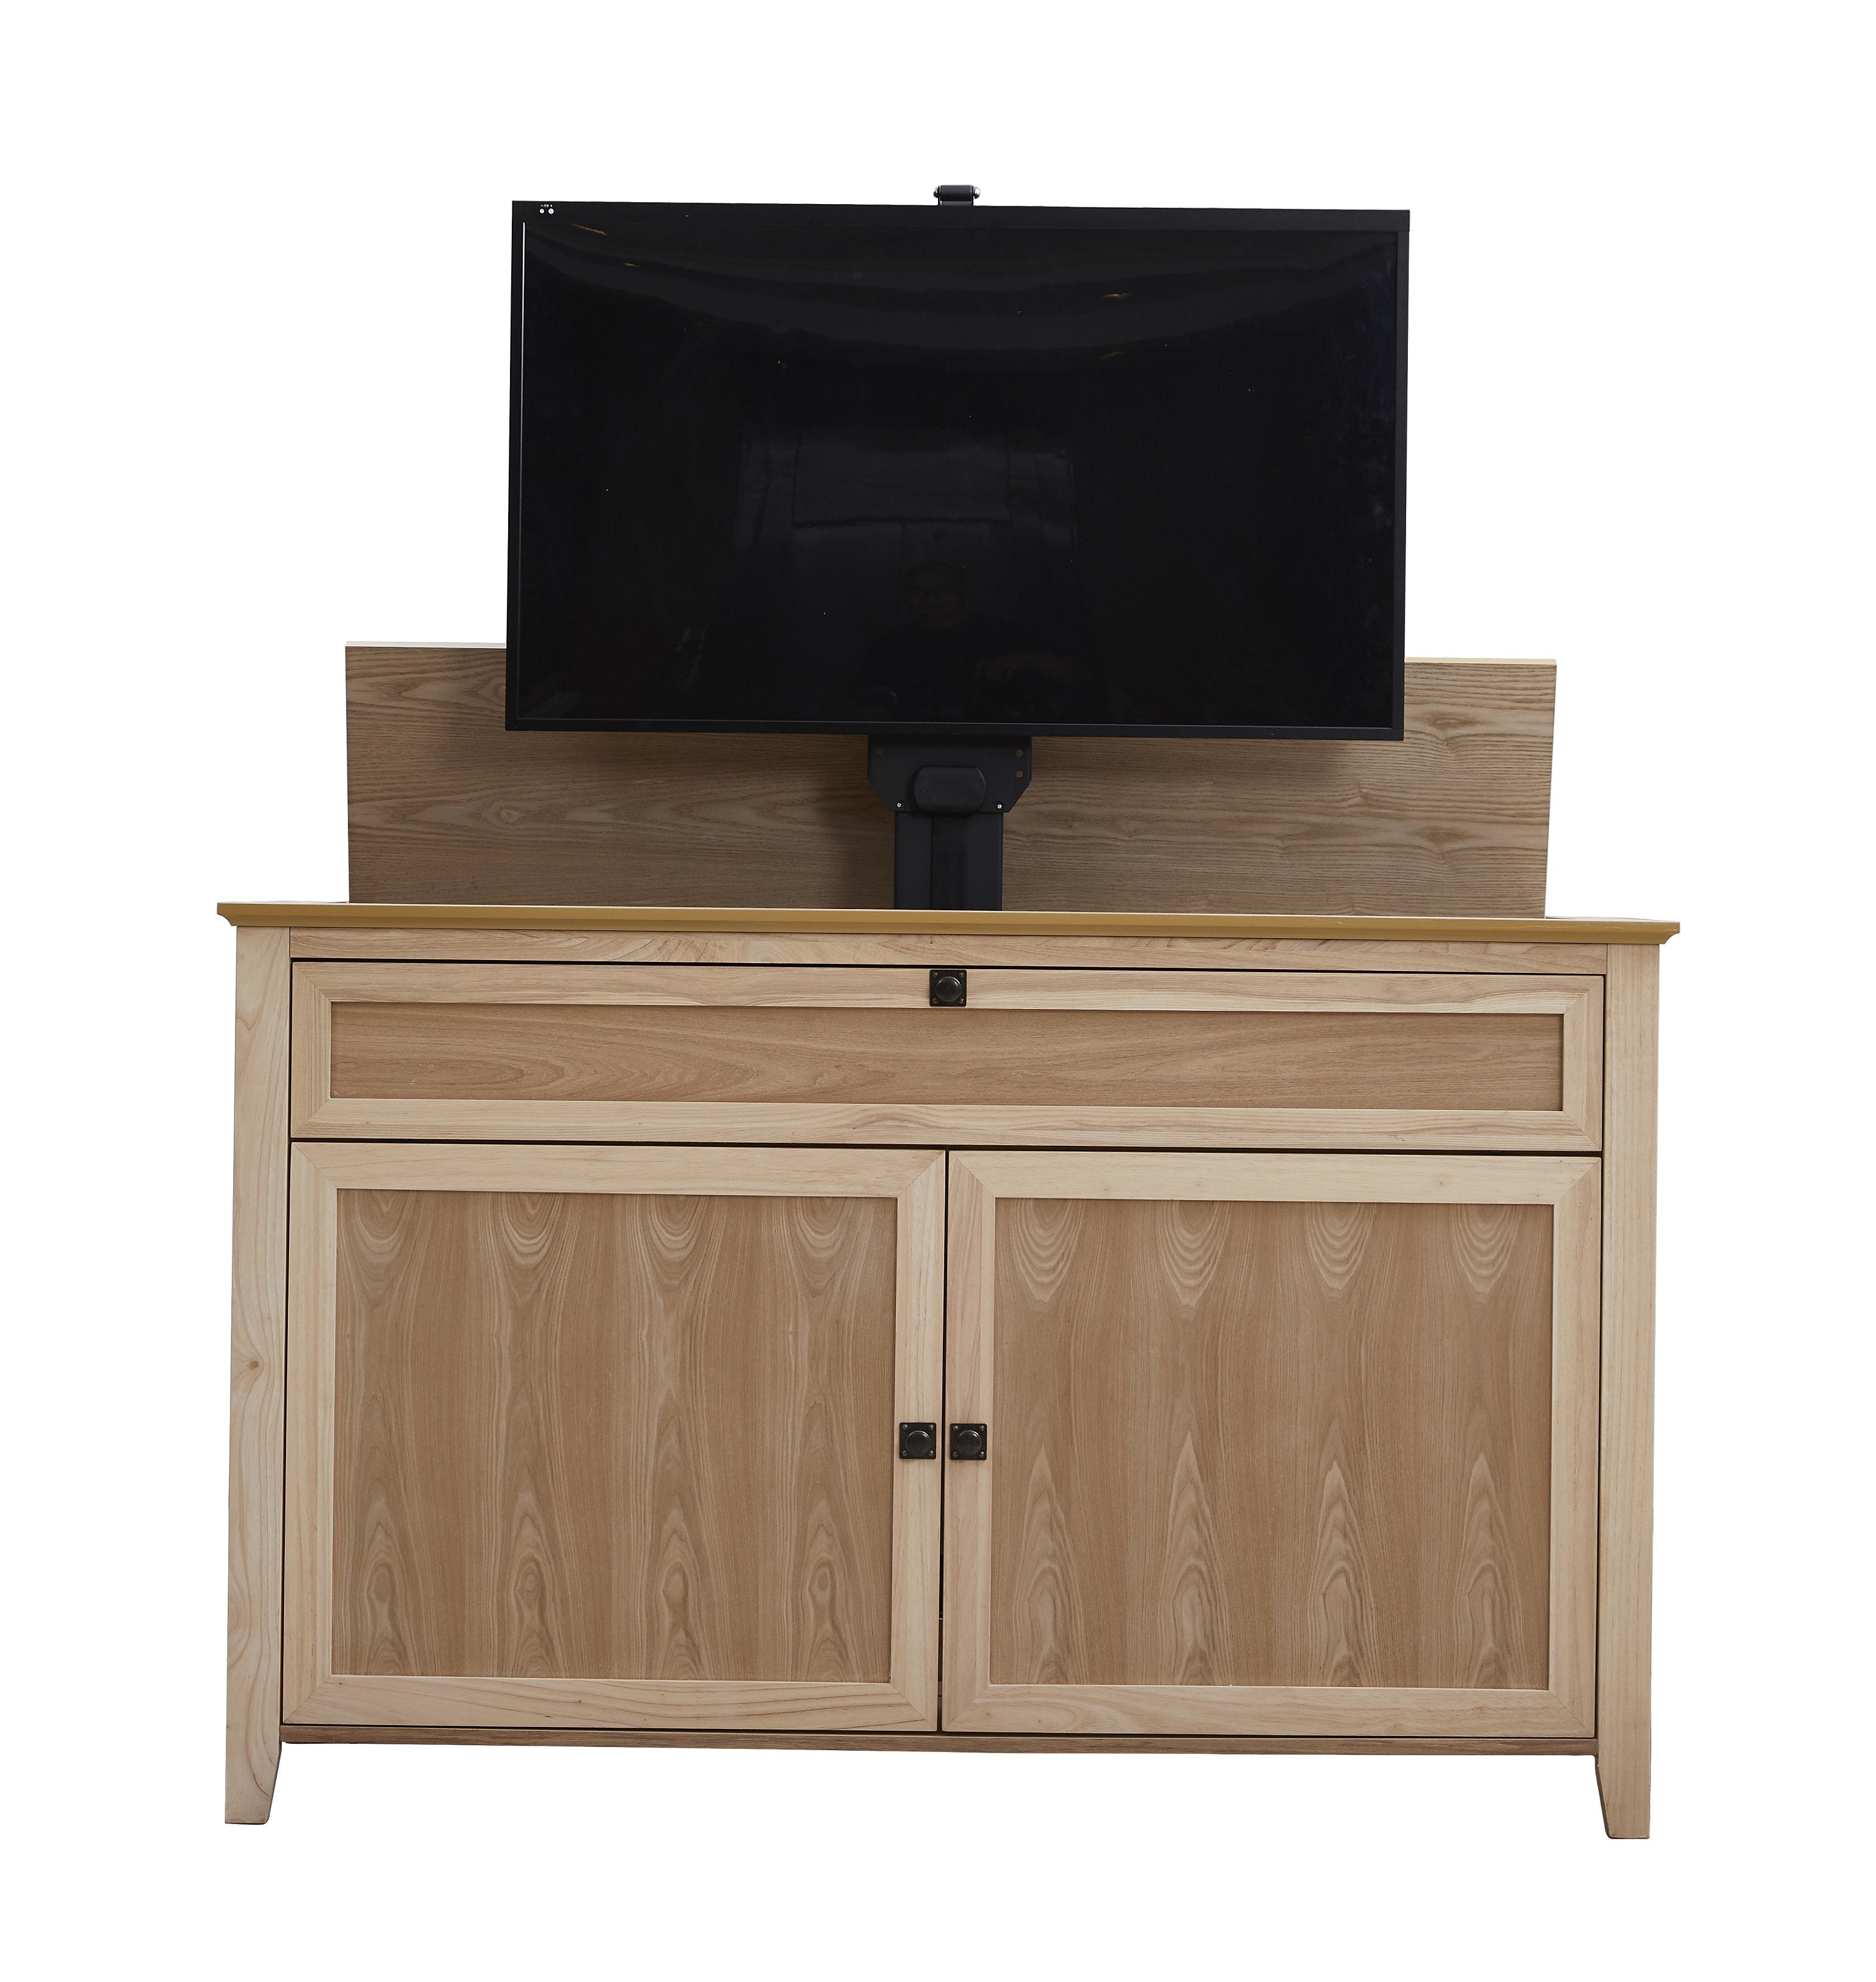 	The Claymont Unfinished 70163 TV Lift Cabinet for 65 inch Flat screen TVs